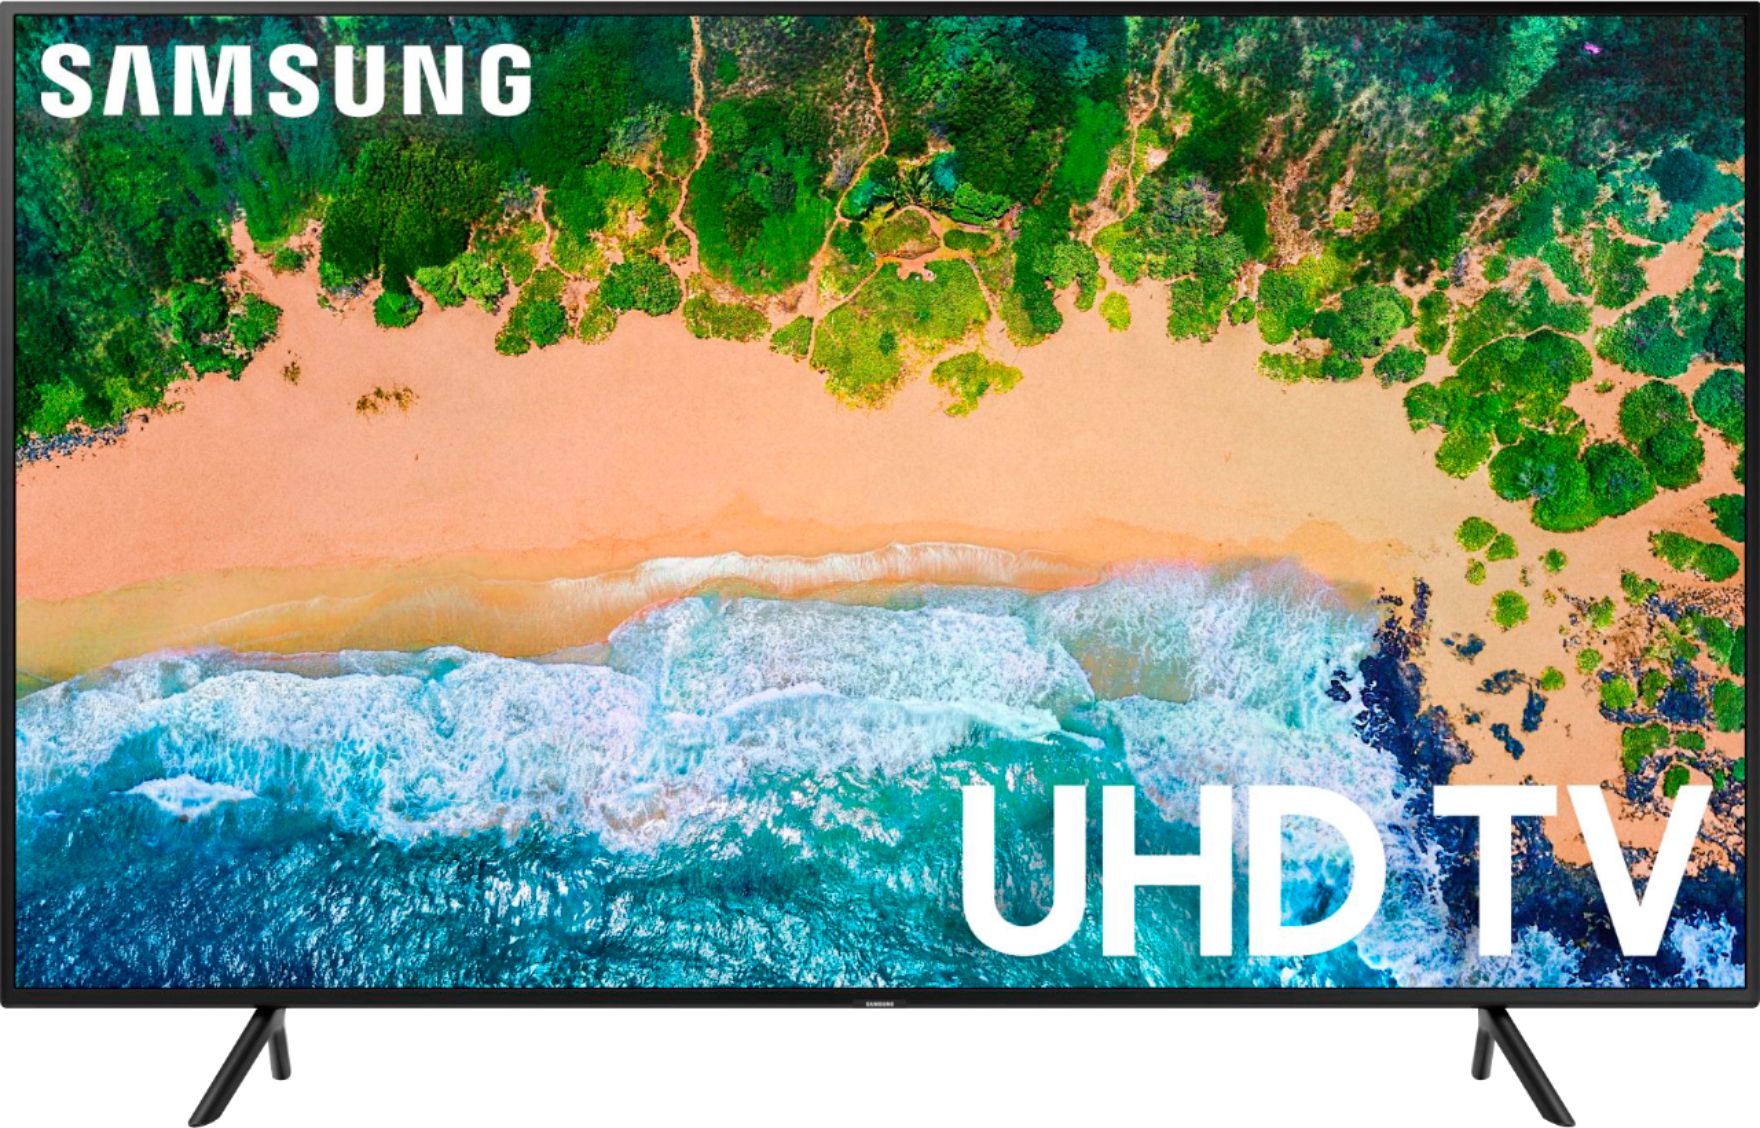 Samsung - 58" Class - LED - 6 Series - 2160p - Smart - 4K UHD TV with HDR